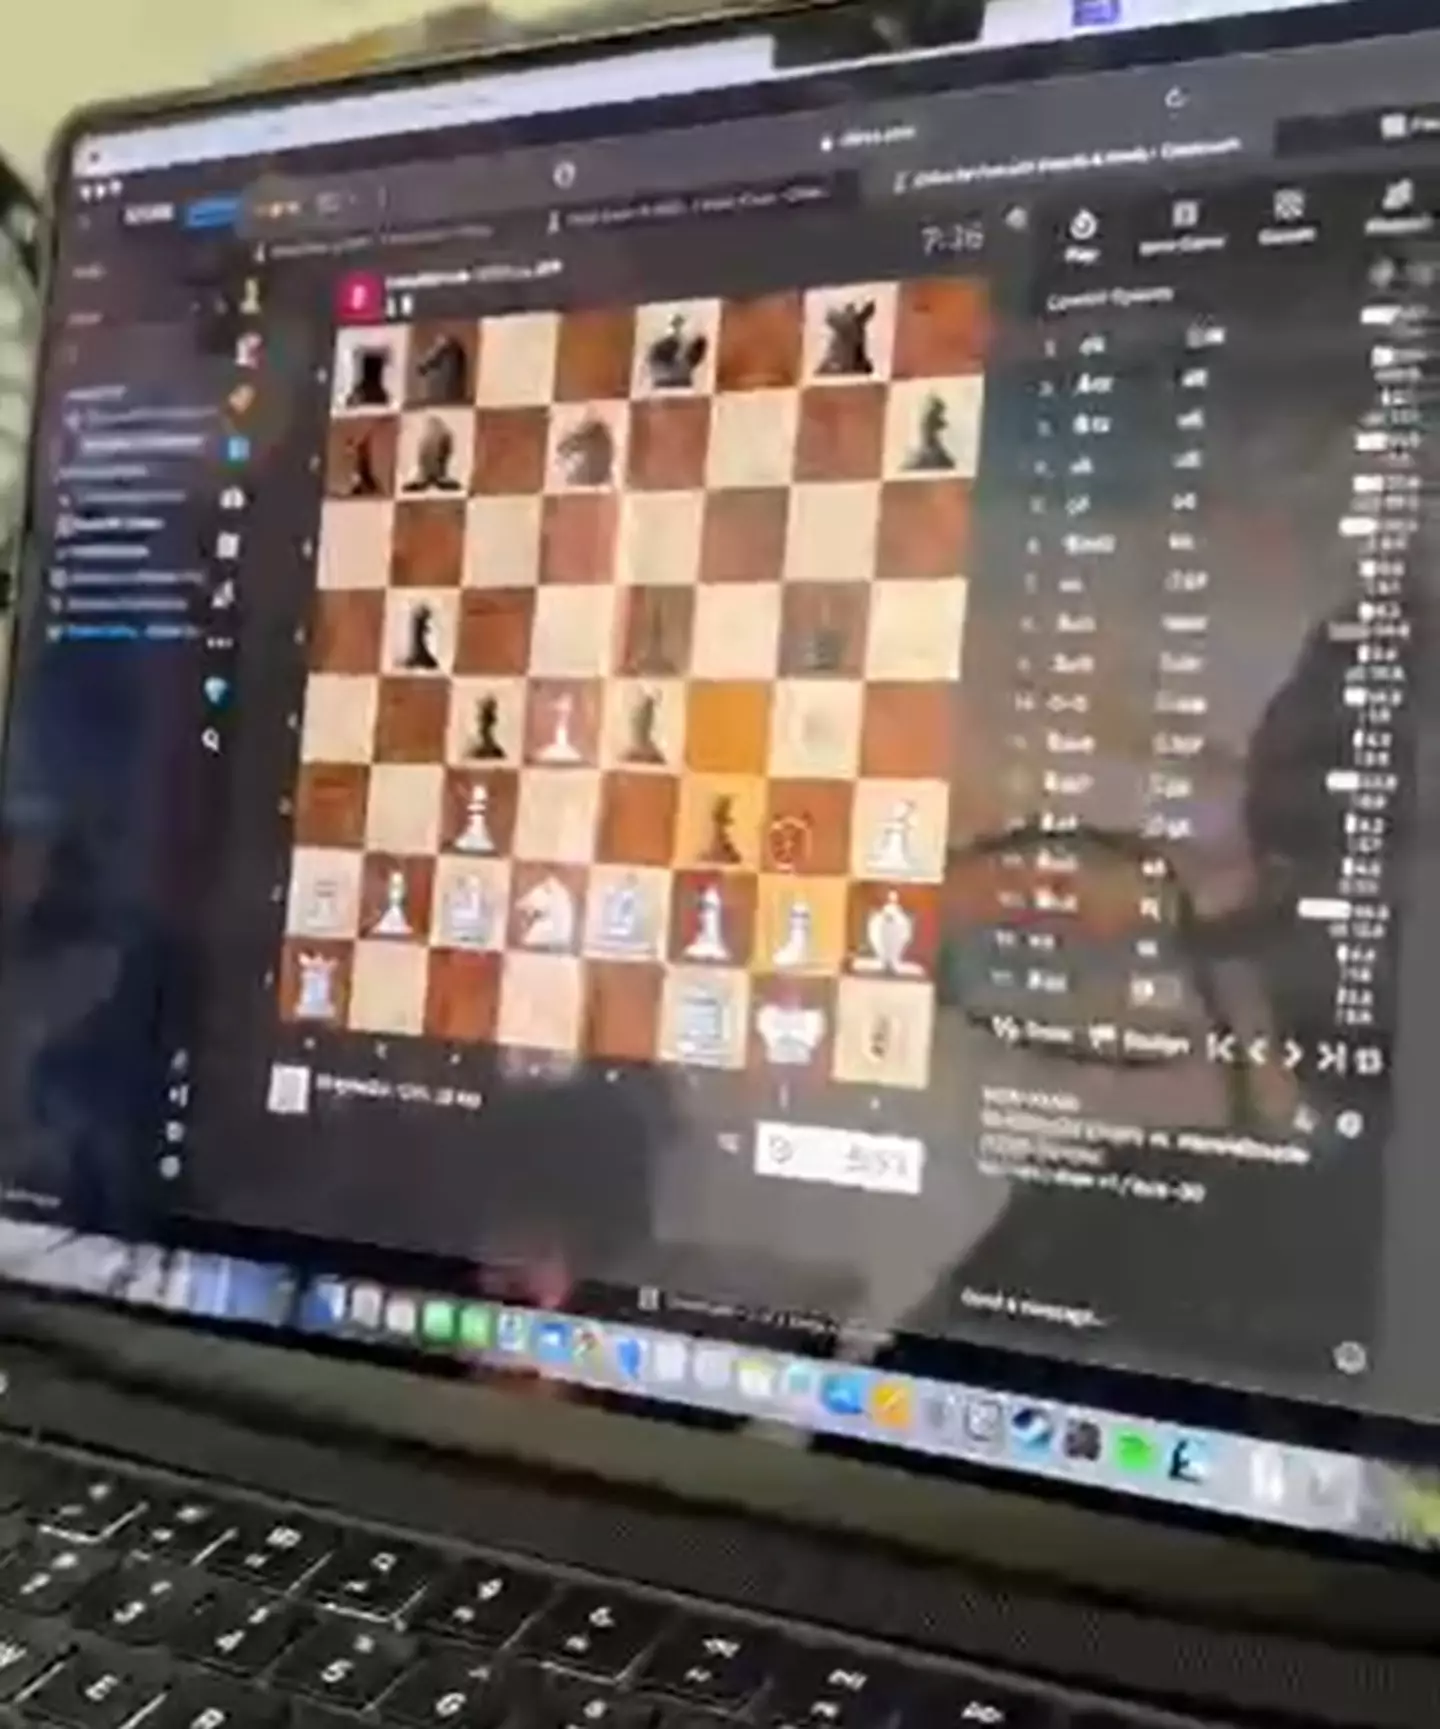 Noland has been been able to play chess with a chip in his brain. (X/@Neuralink)